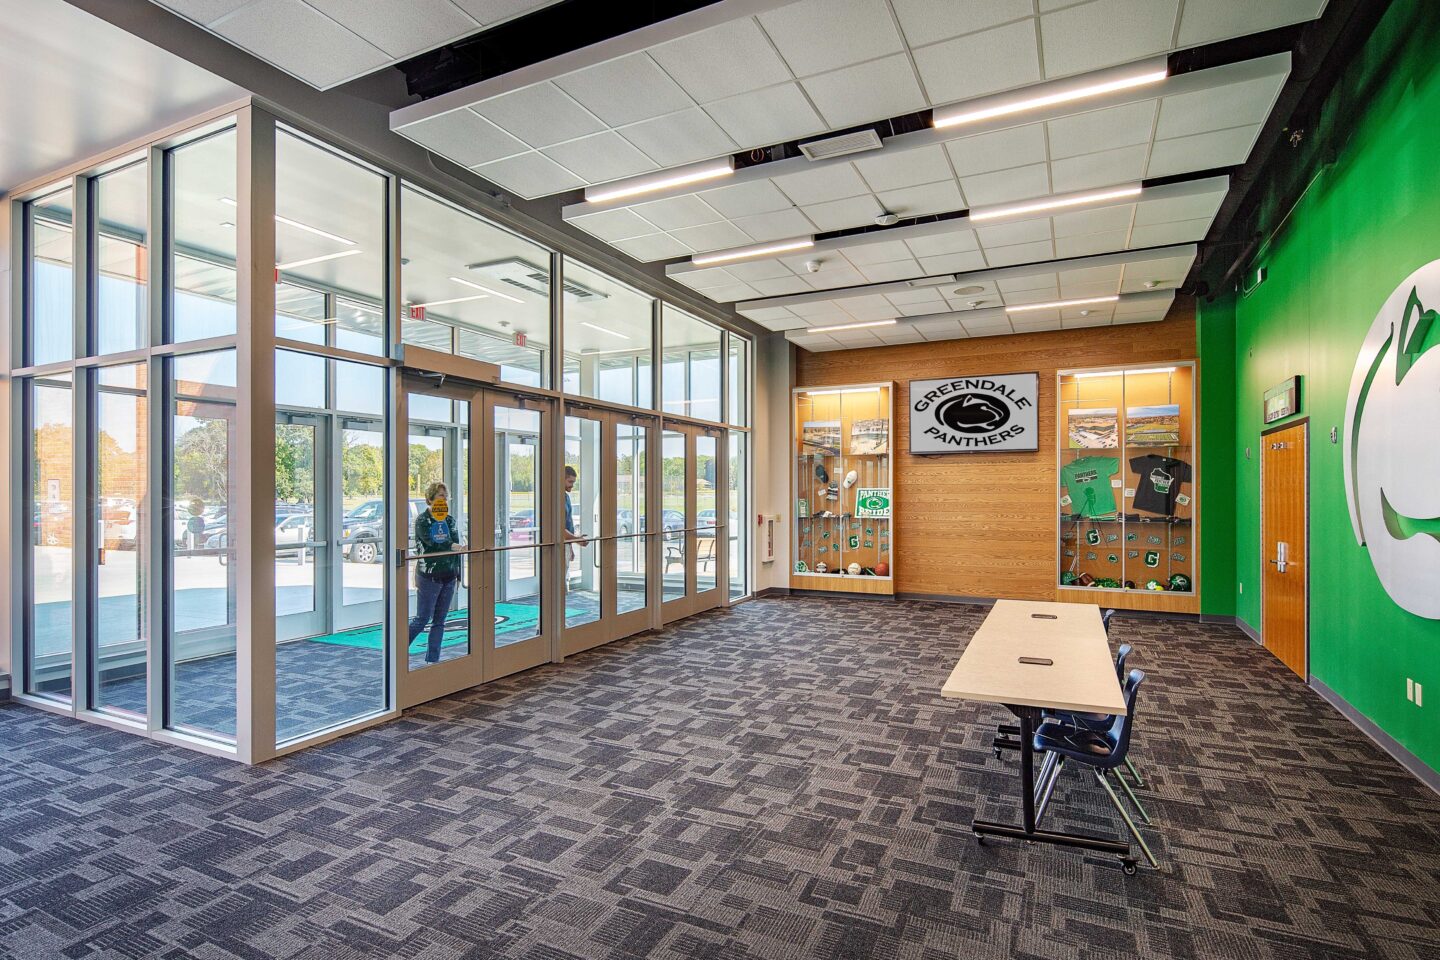 Community members come through a bright, glassed entrance to an athletics lobby accented by a trophy case and graphic wall